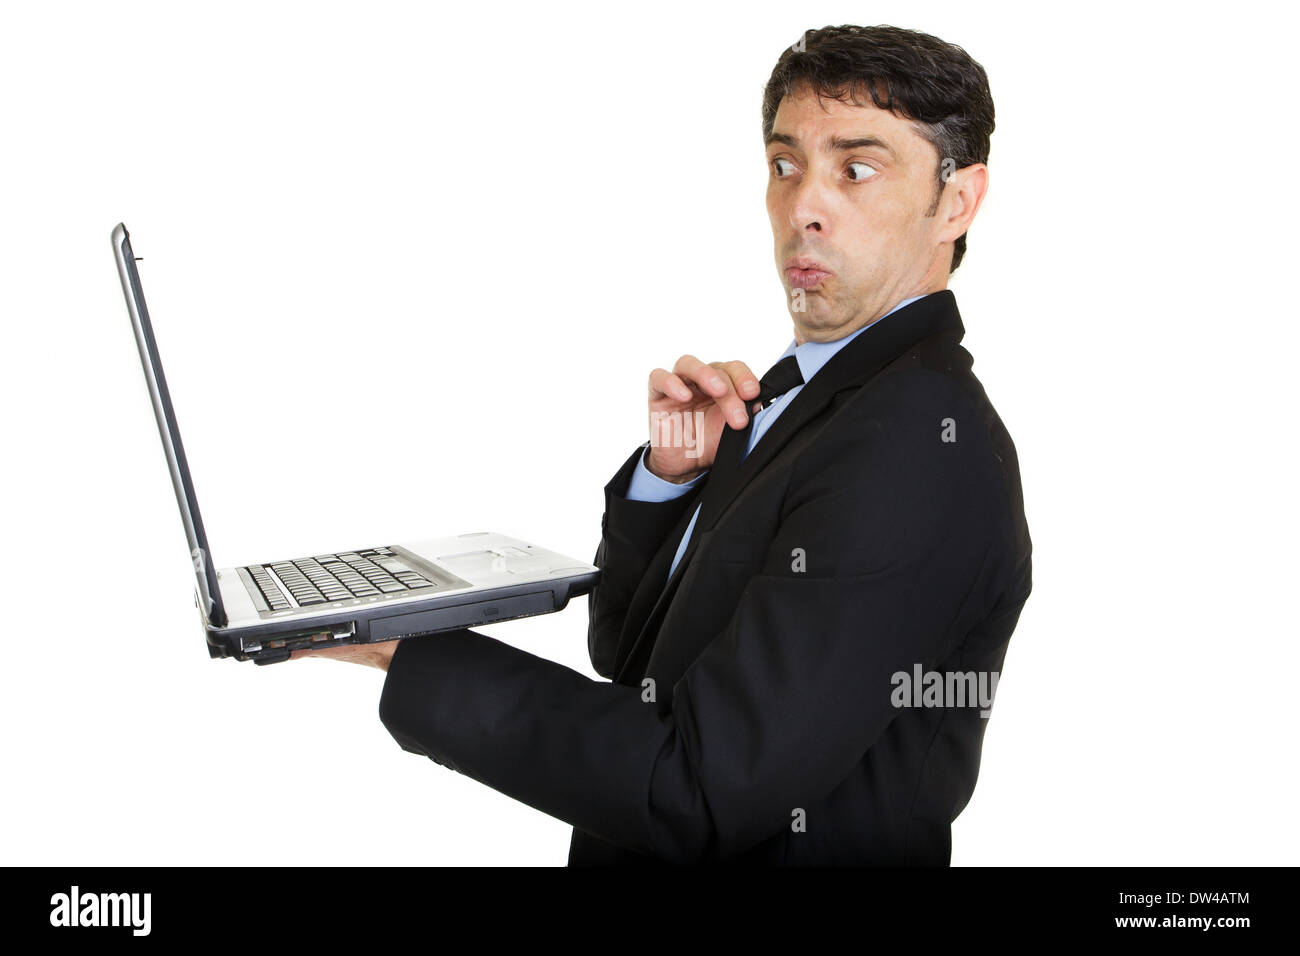 Man looking taken aback and affronted as he looks at the screen of his handheld laptop computer Stock Photo